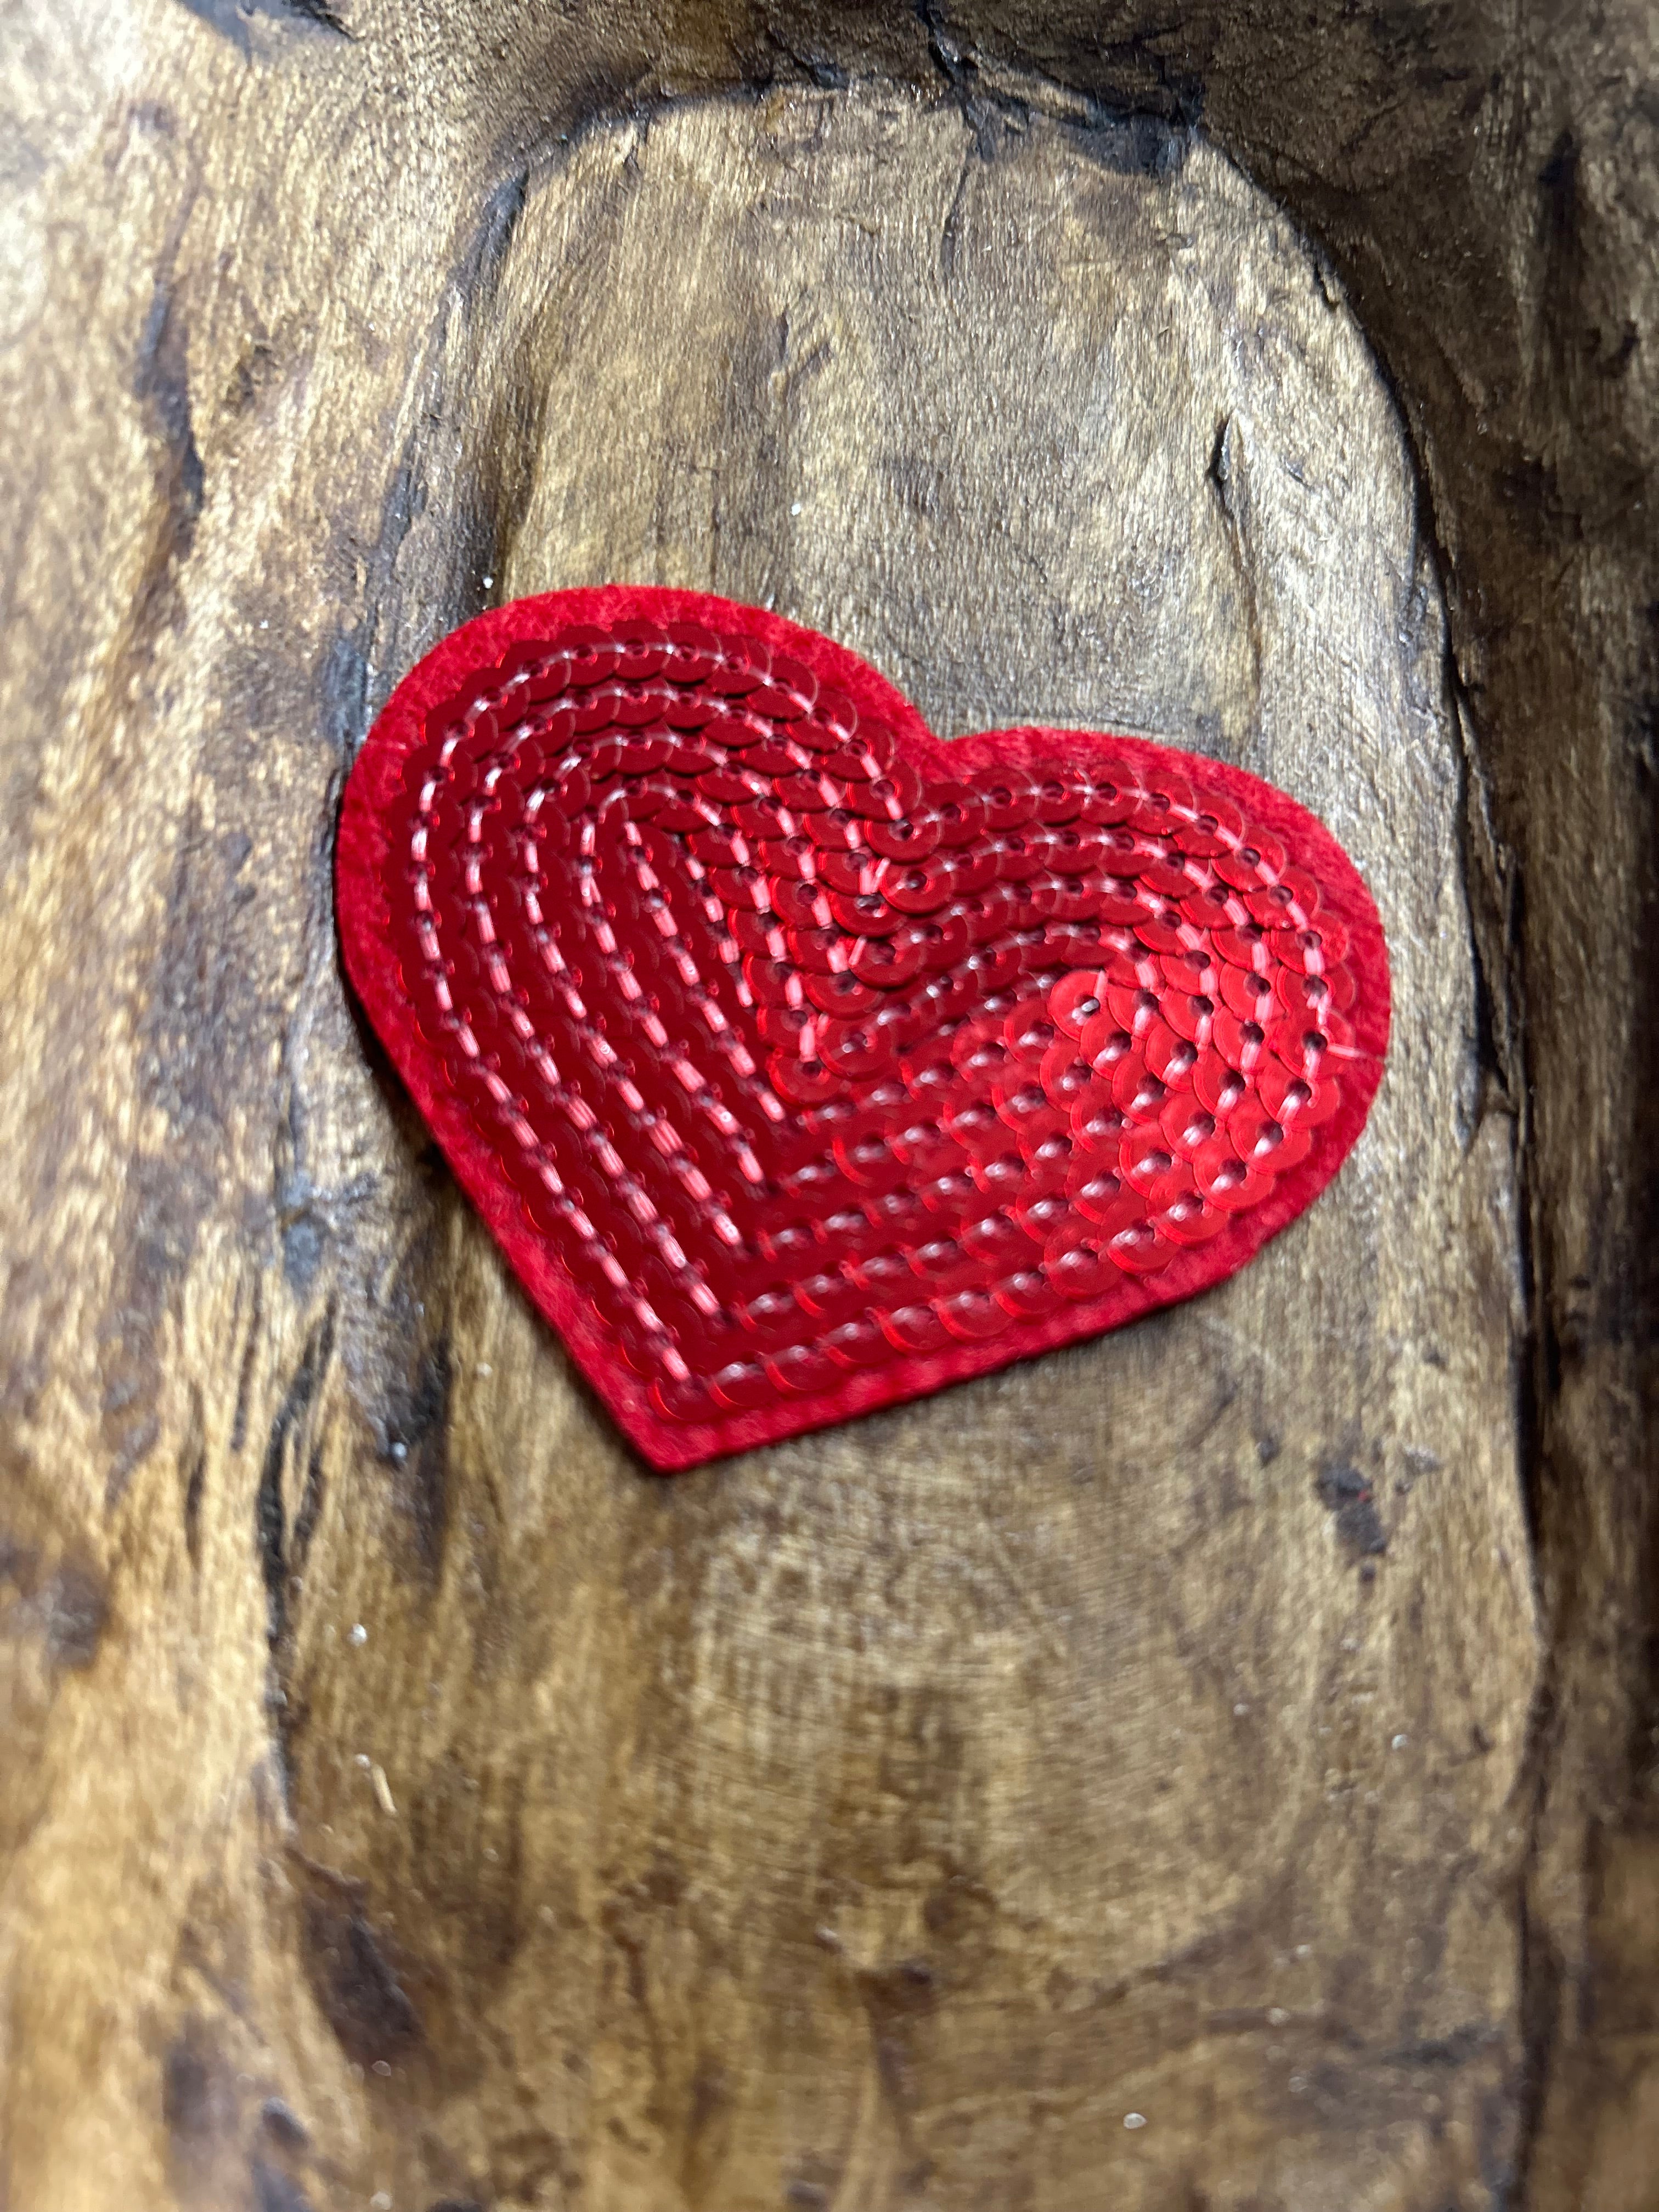 Sequins heart patches